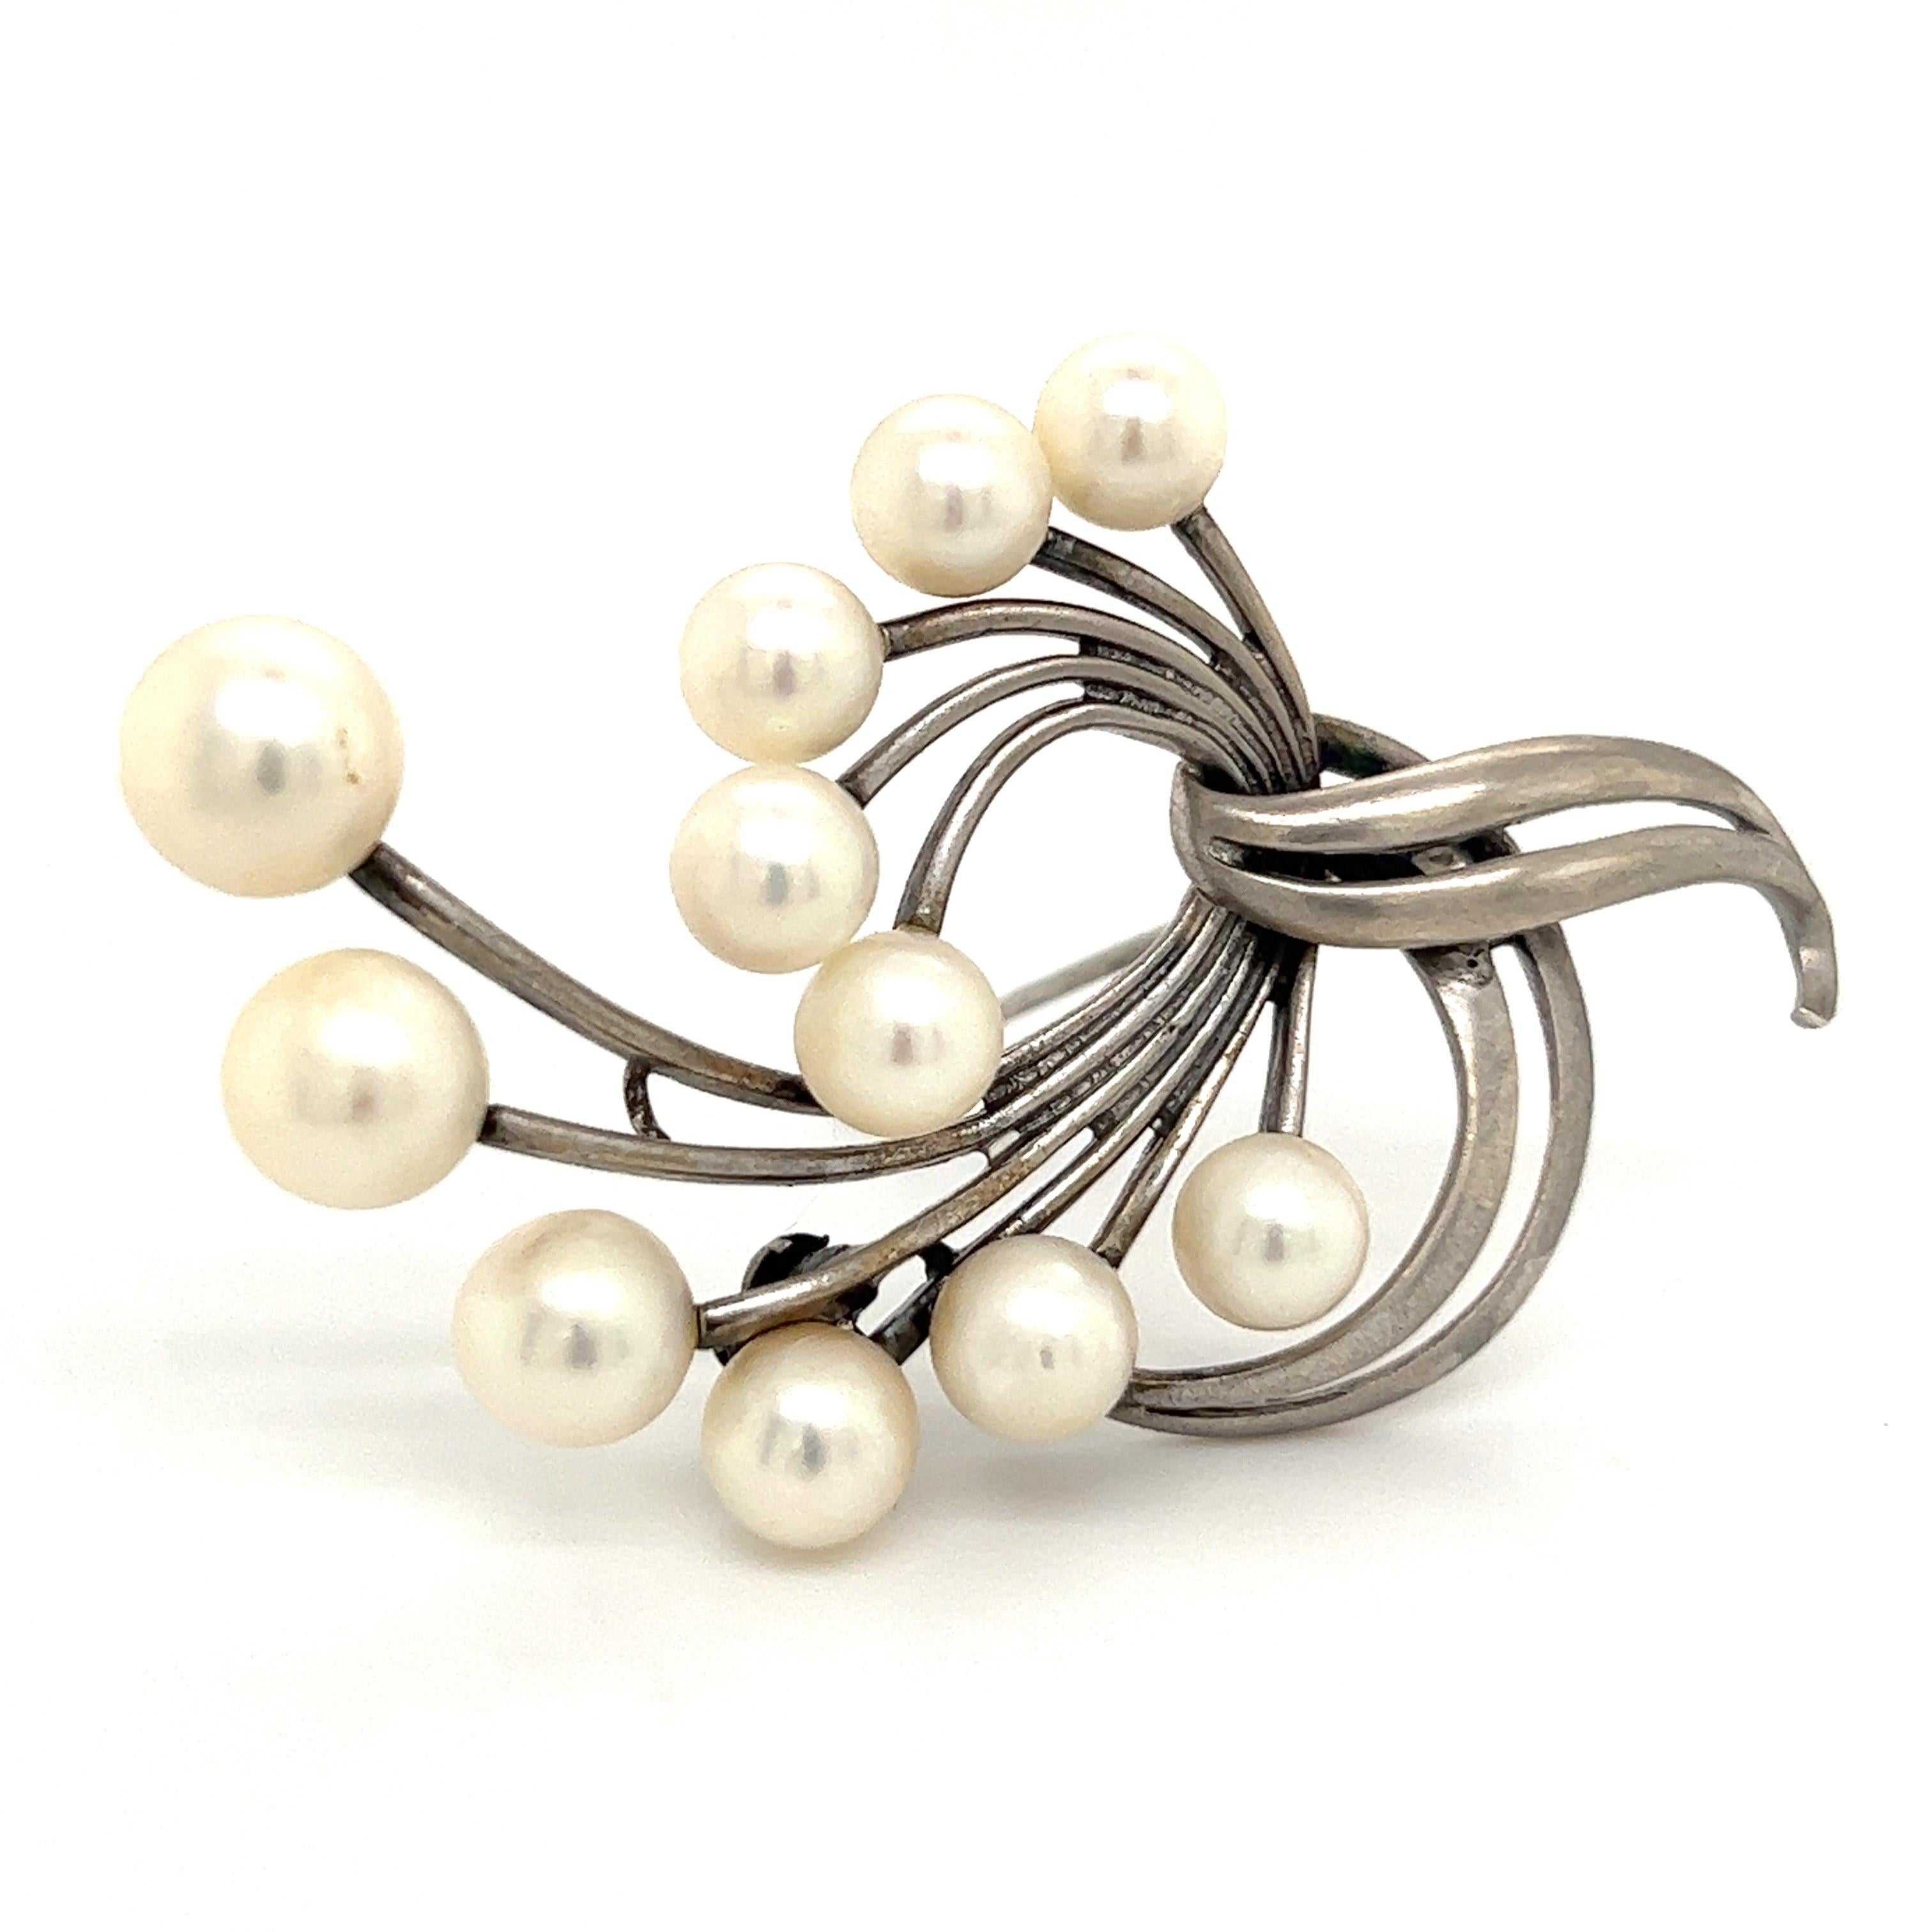 Mikimoto Estate Akoya Pearl XL Spray Brooch Sterling Silver 7.62 mm In Good Condition For Sale In Brooklyn, NY